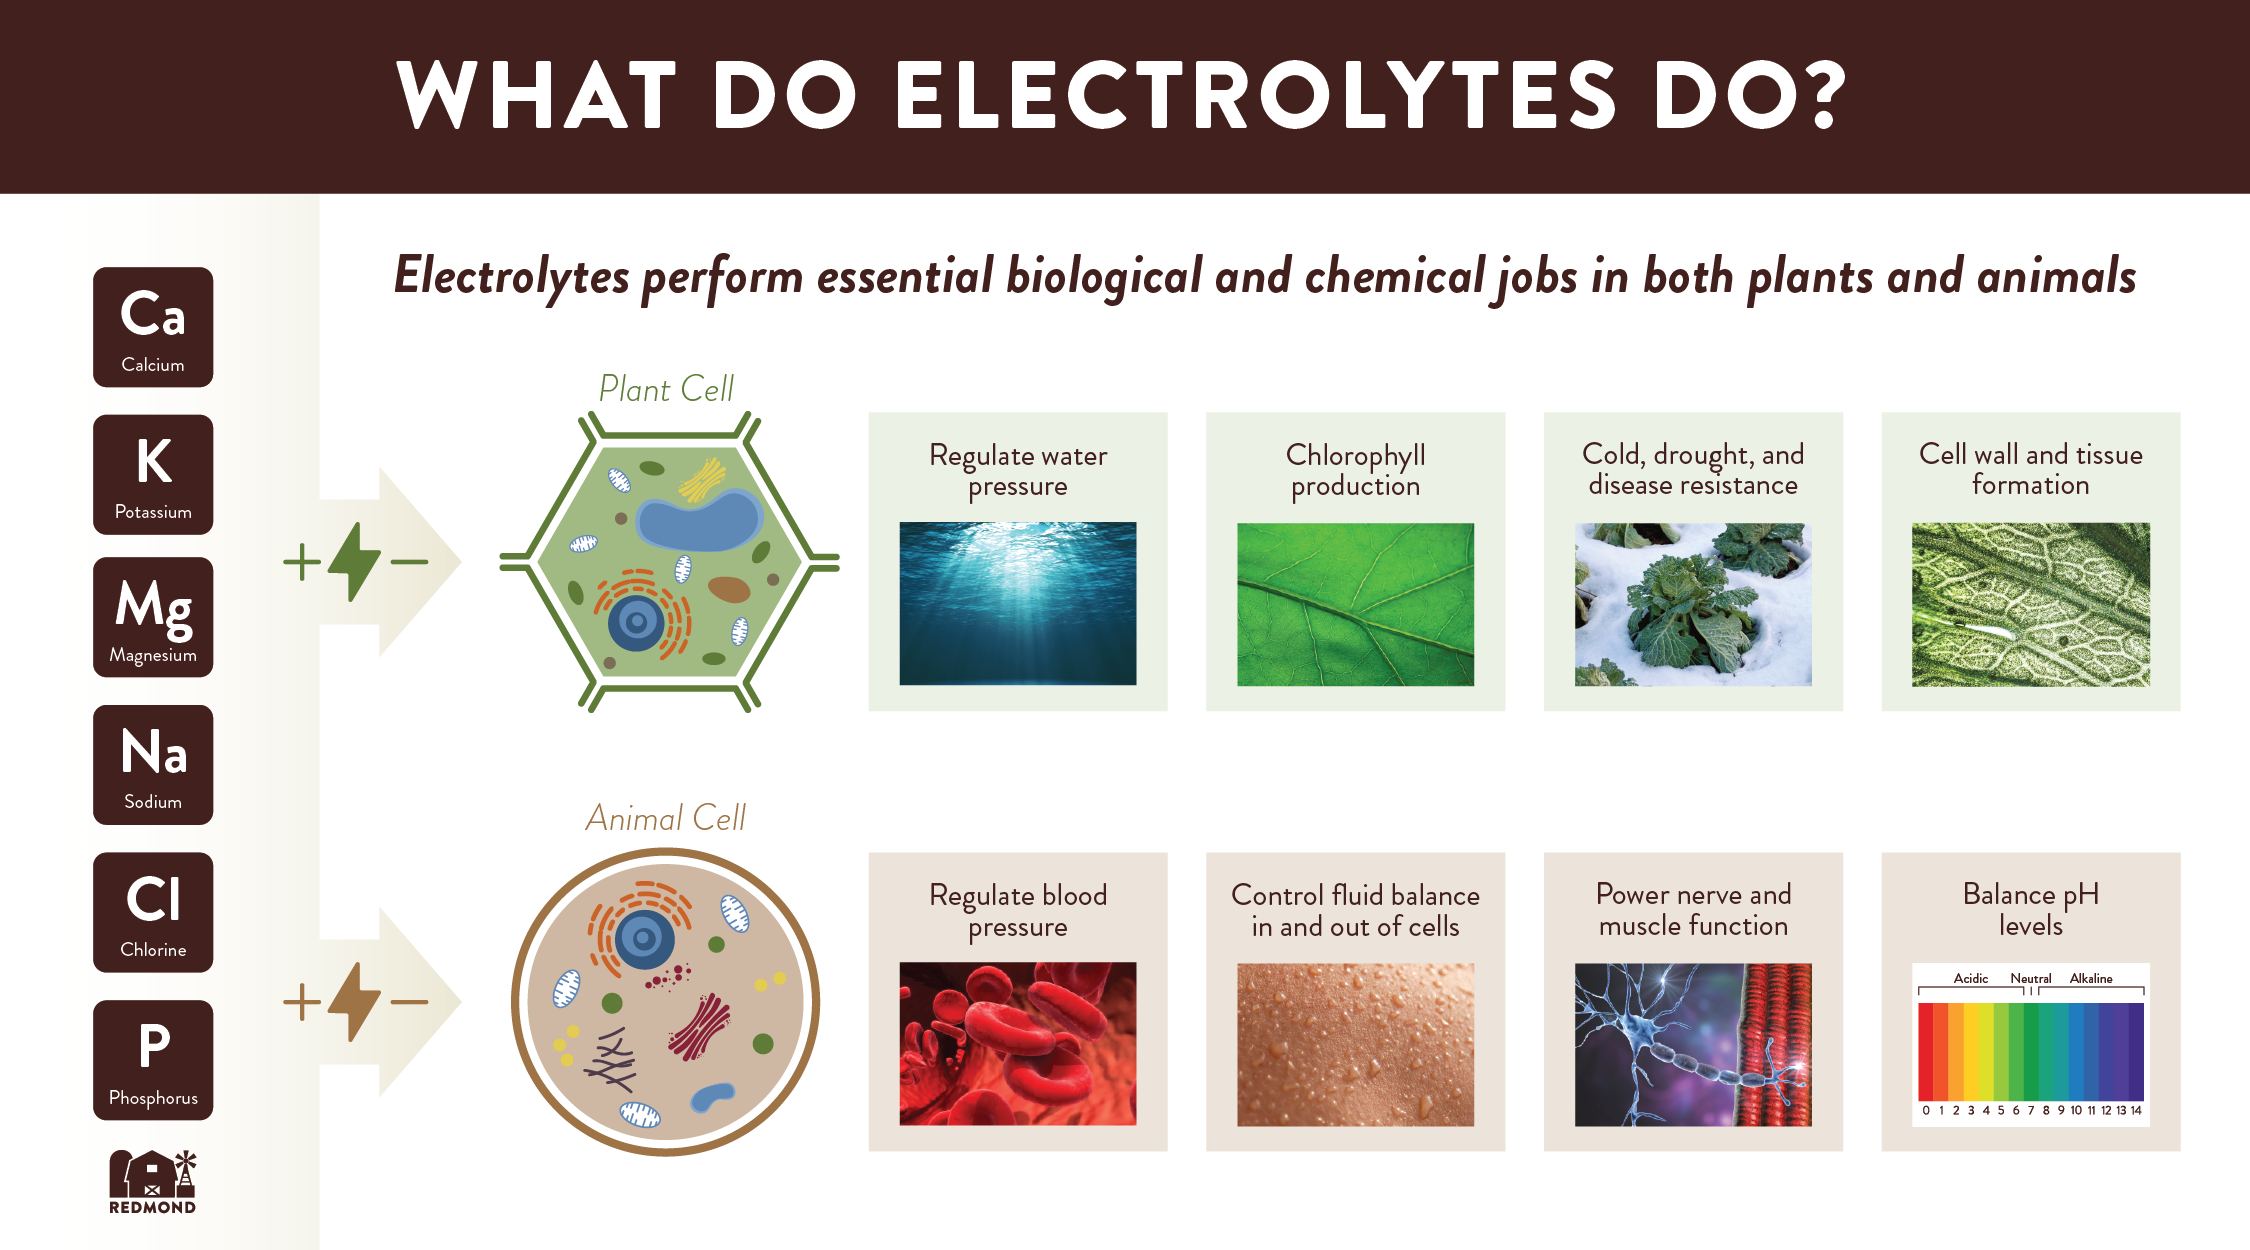 What do electrolytes do for animals and plants